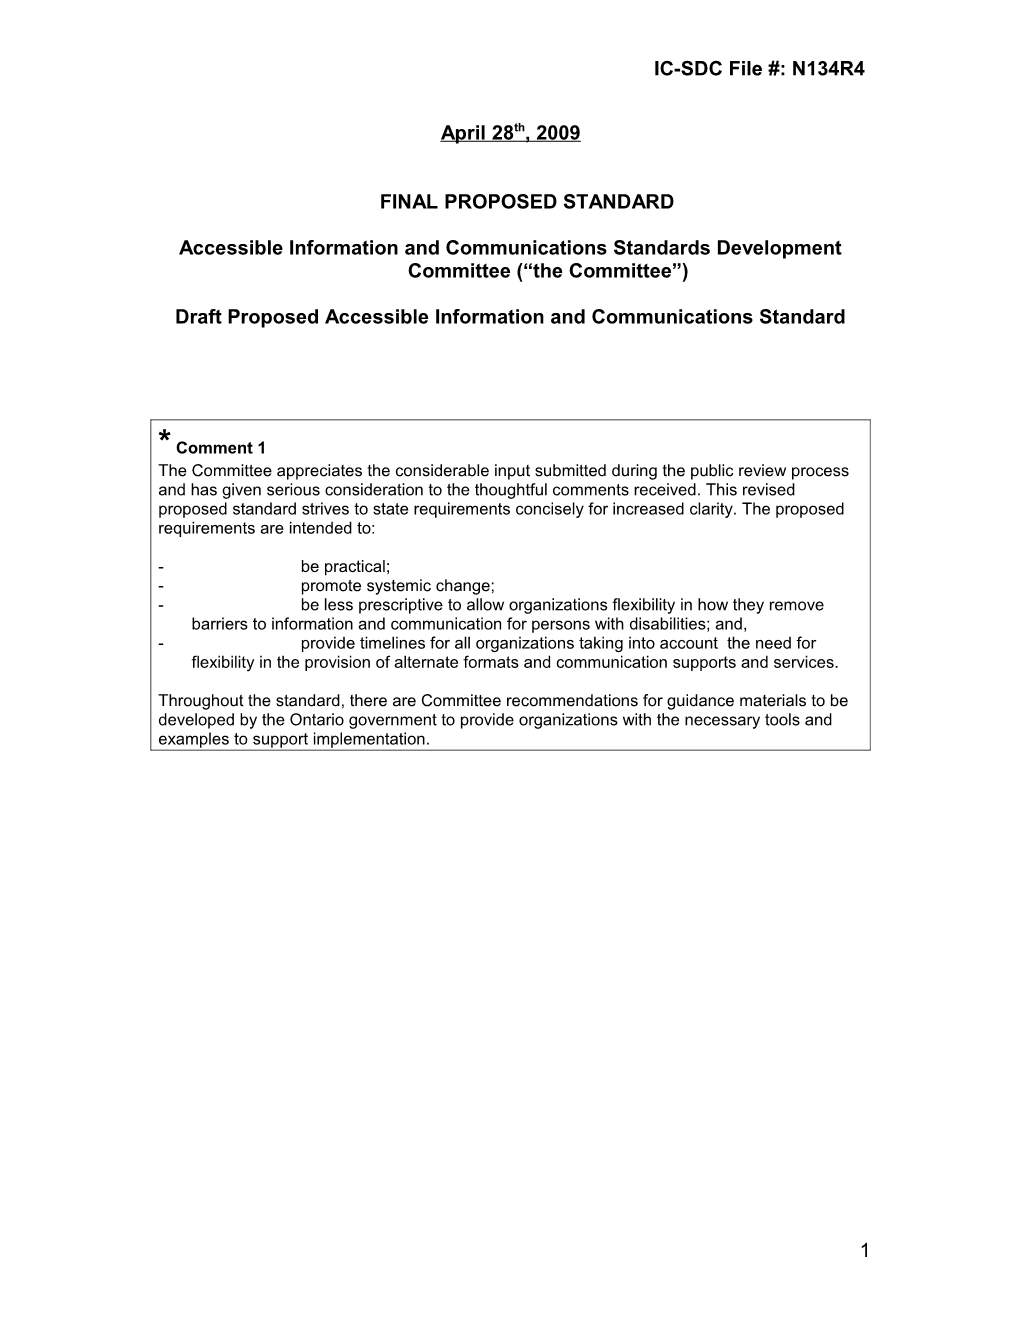 Accessible Information and Communications Standards Development Committee ( the Committee )